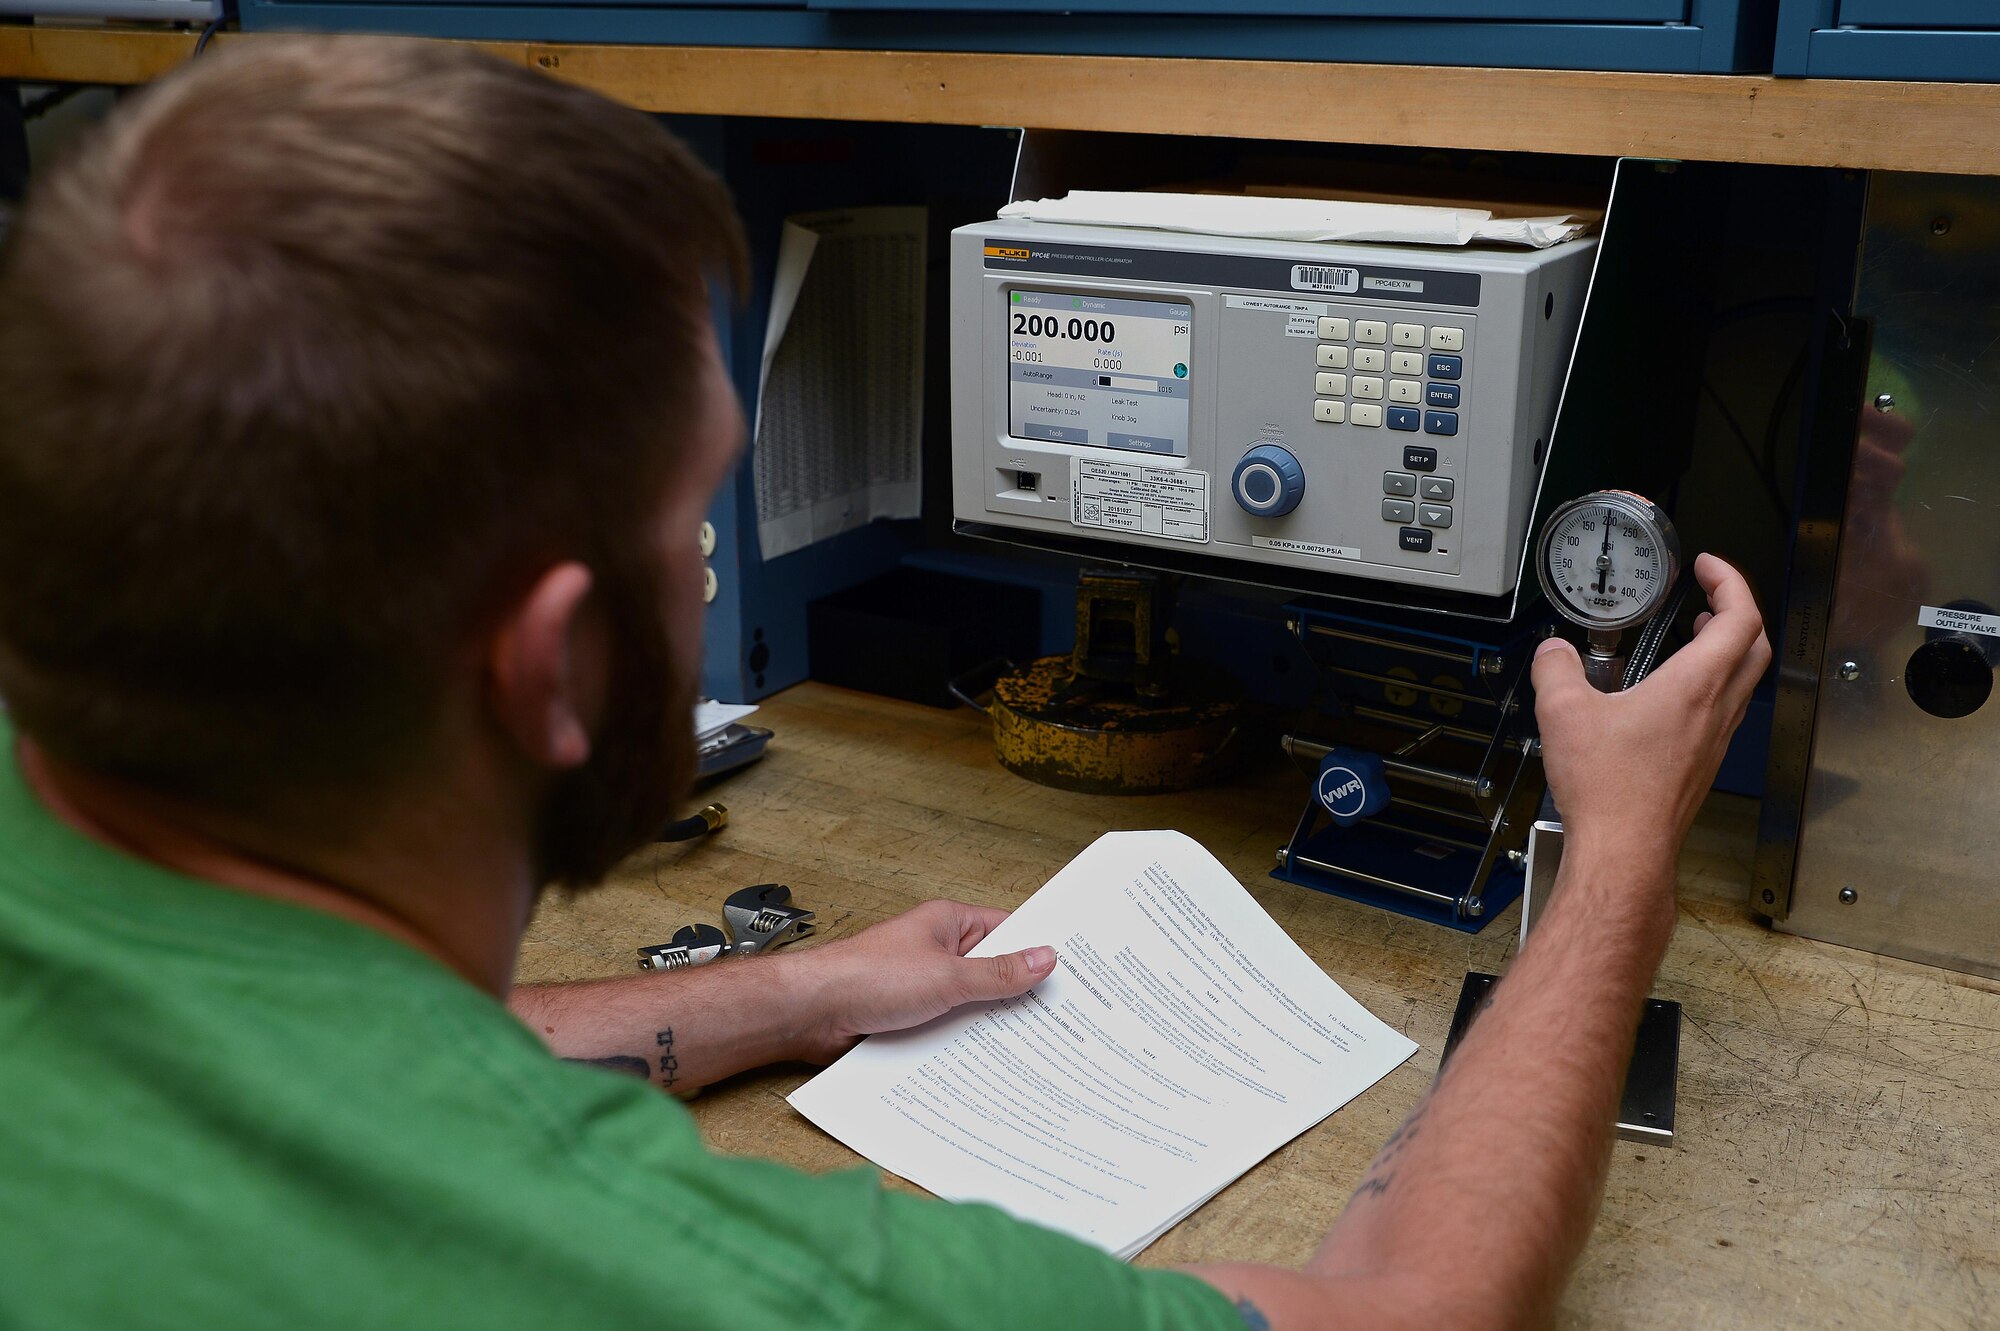 Sean Stone, 62nd Maintenance Squadron precision measurement equipment laboratory technician, calibrates a pressure gauge June 7, 2016 at Joint Base Lewis-McChord, Wash. The PMEL shop takes measurements in increments as small as millionths to ensure equipment is properly and calibrated and safe to use. (U.S. Air Force photo/Senior Airman Jacob Jimenez)   